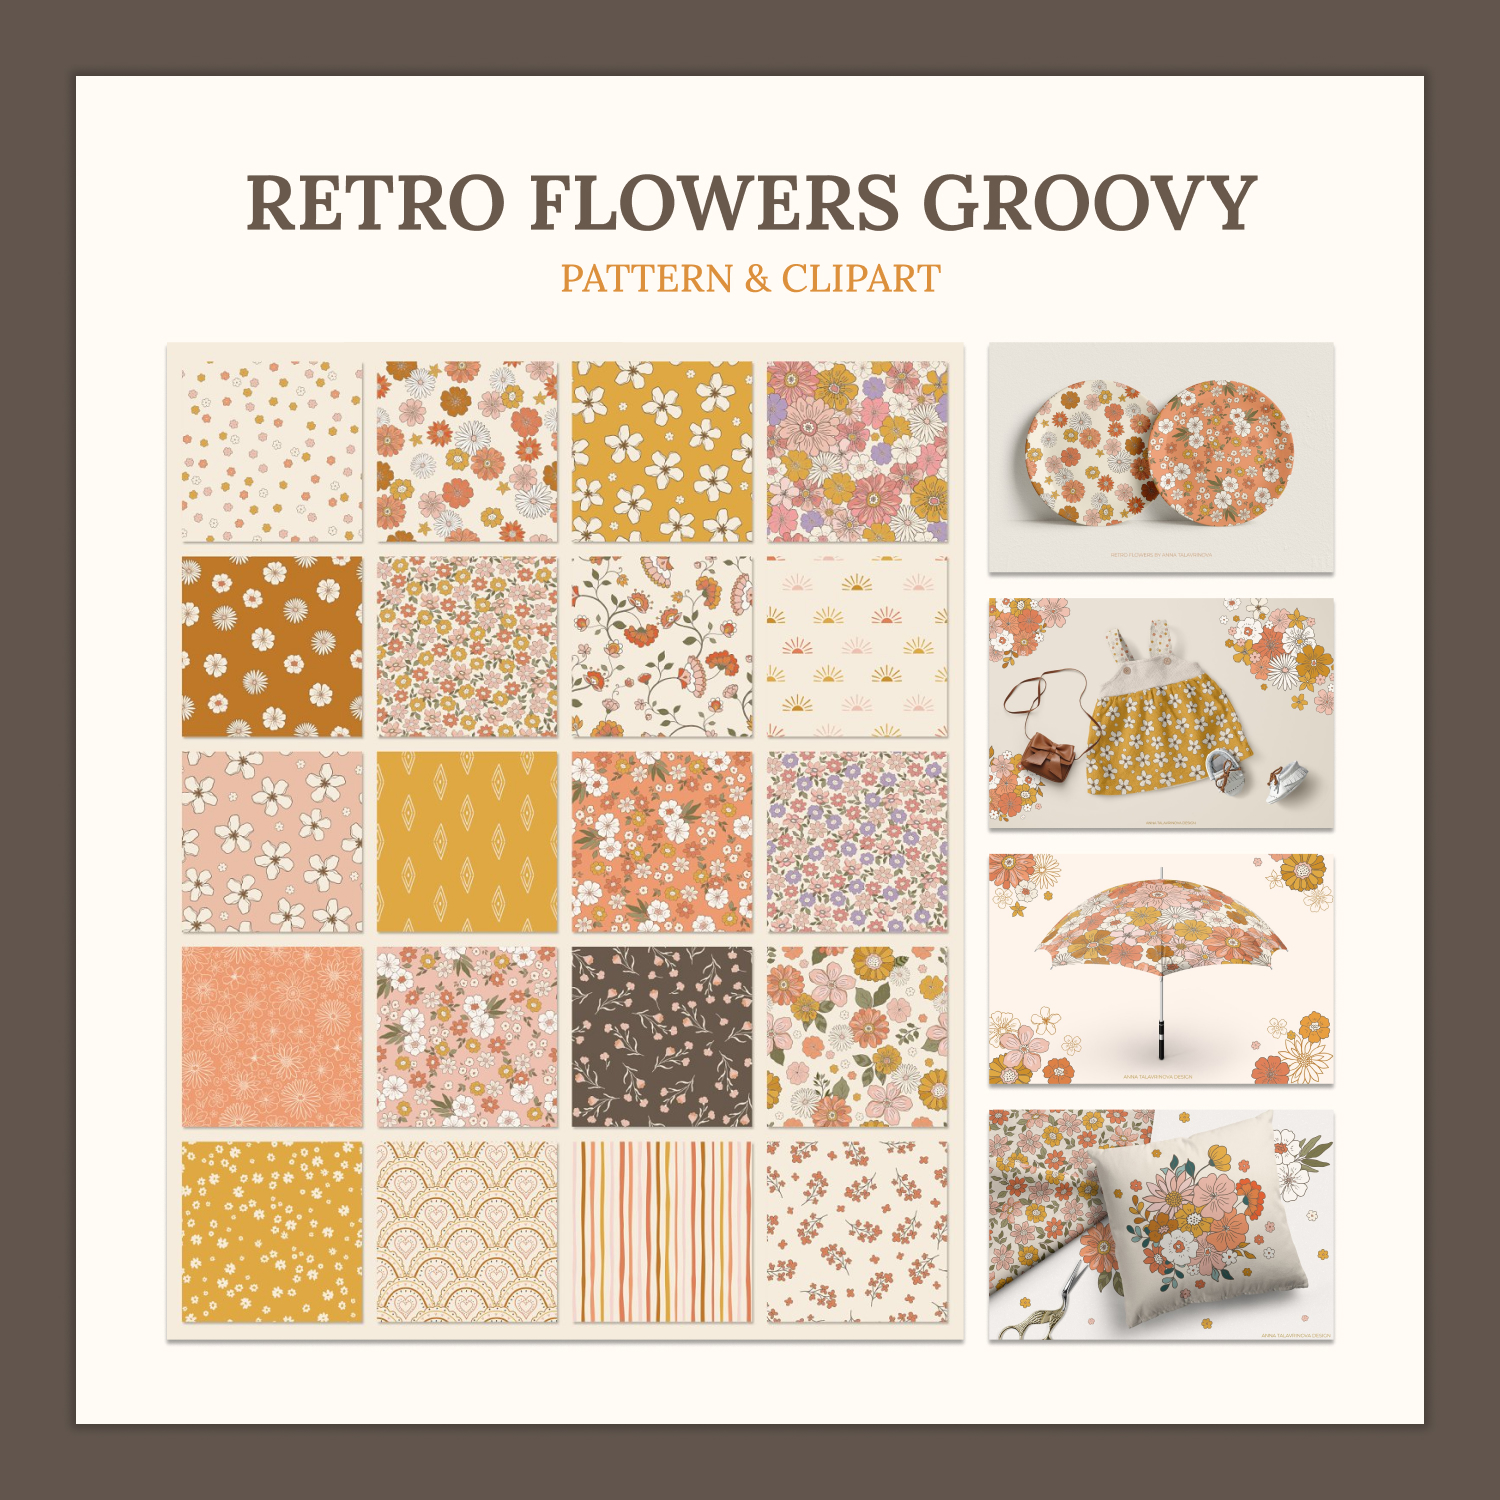 Preview retro flowers groovy pattern clipart.